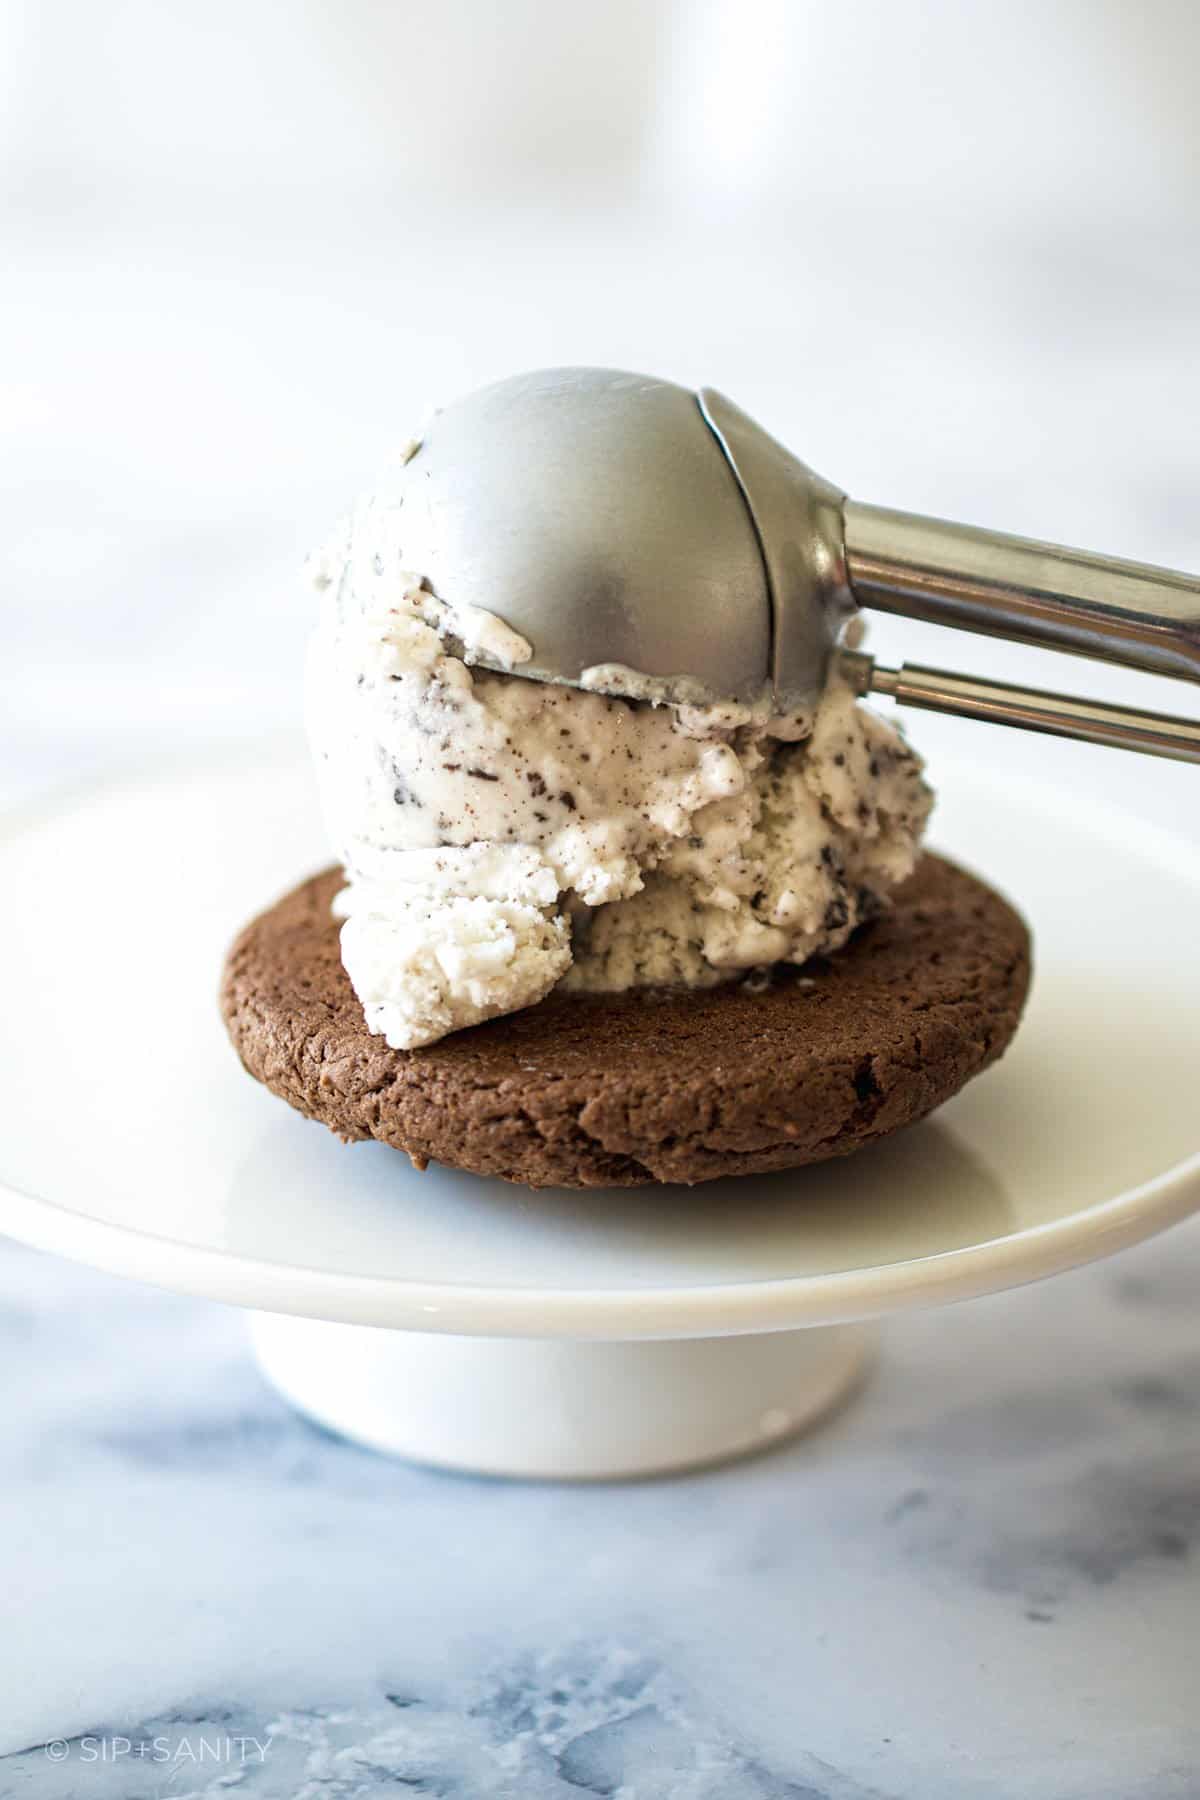 Scooping ice cream onto a chocolate cookie.